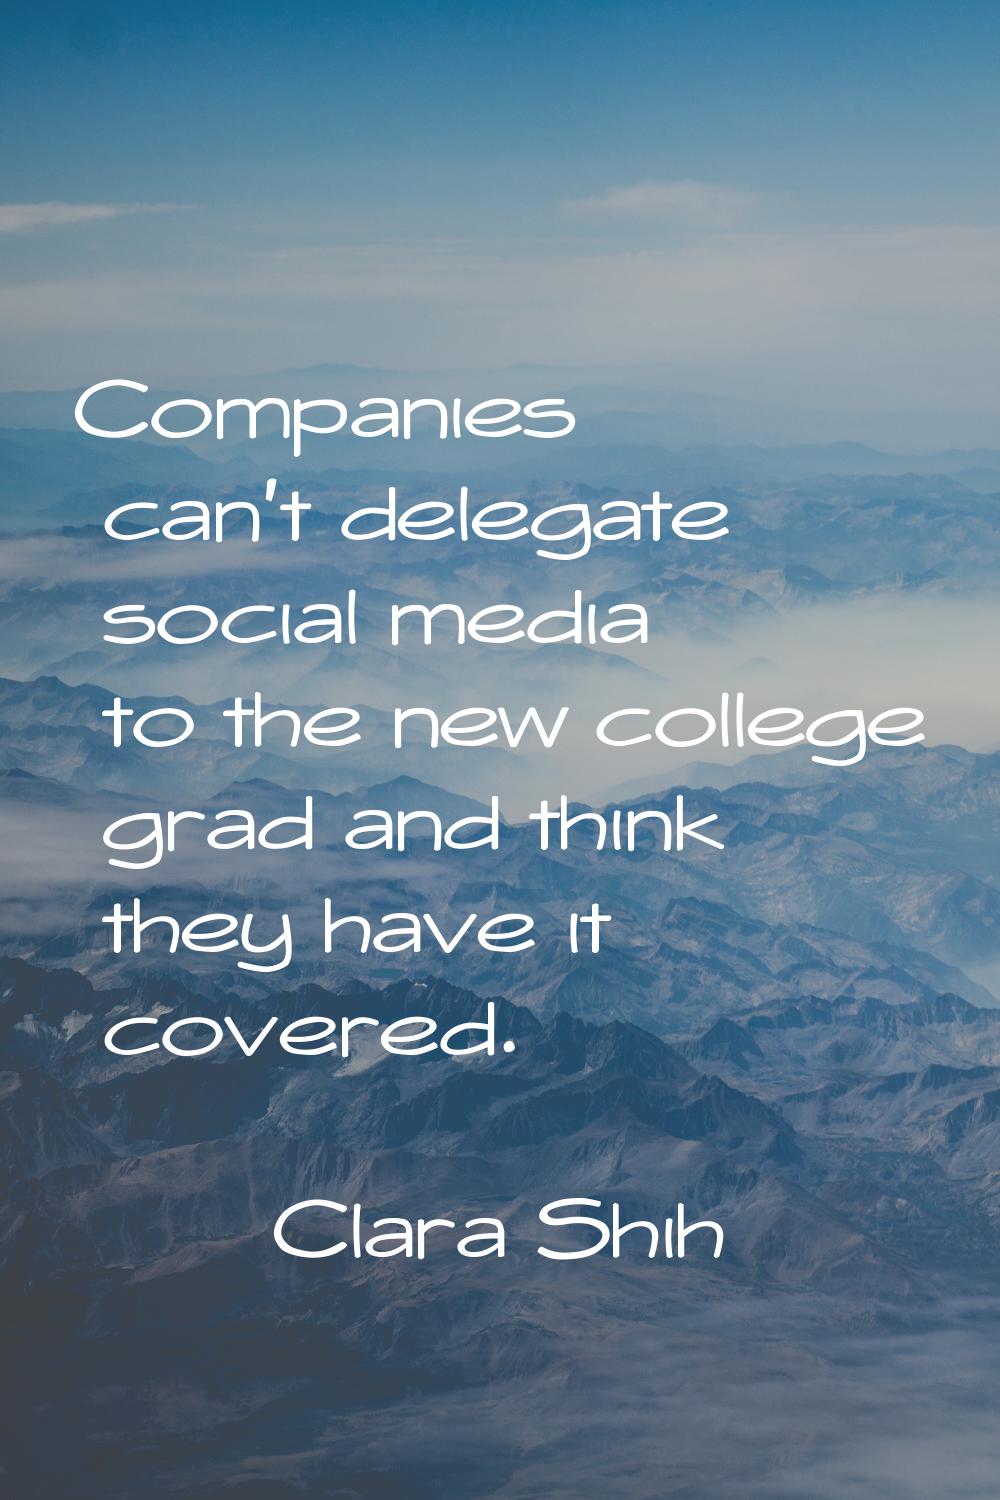 Companies can't delegate social media to the new college grad and think they have it covered.